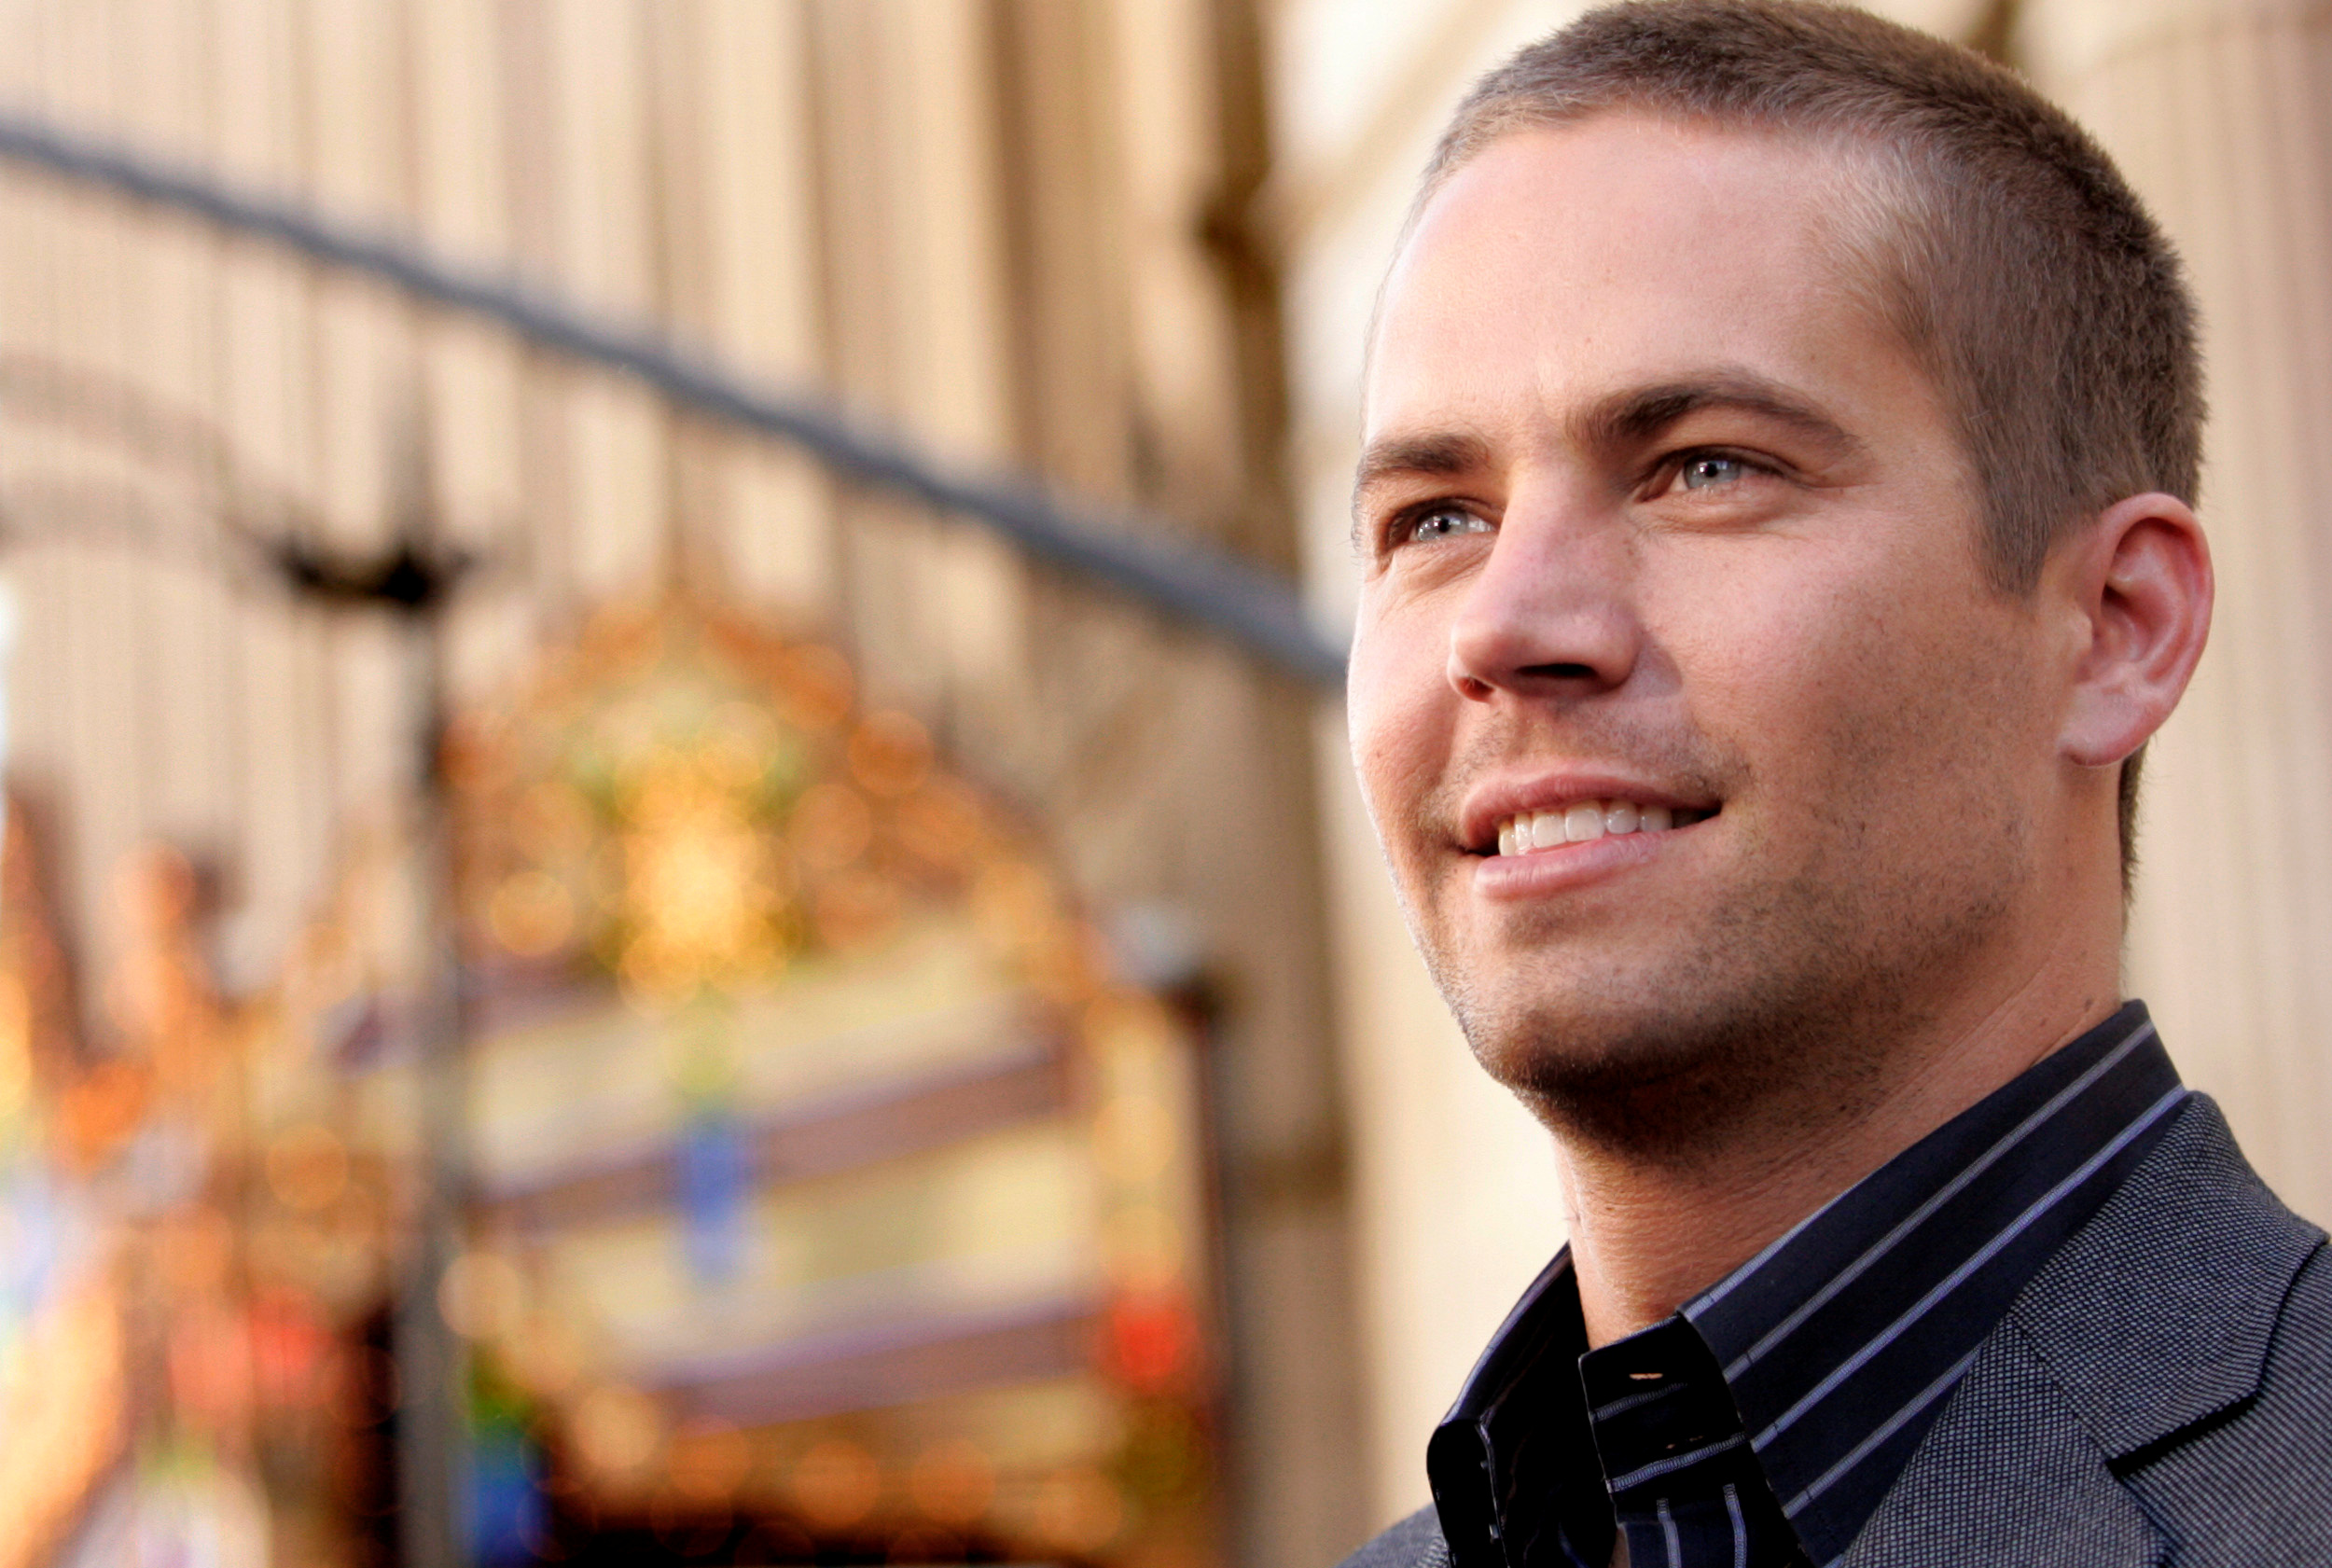 FILE PHOTO: Cast member Paul Walker poses at the world premiere of Walt Disney Pictures "Eight Below" at El Capitan theatre in Hollywood February 12, 2006. The movie, inspired by a true story, portrays the adventures of a scientific expedition, led by Jerry Shepard (Paul Walker), who is forced to leave behind their team of dogs due to an accident in Antarctica. REUTERS/Mario Anzuoni/File Photo